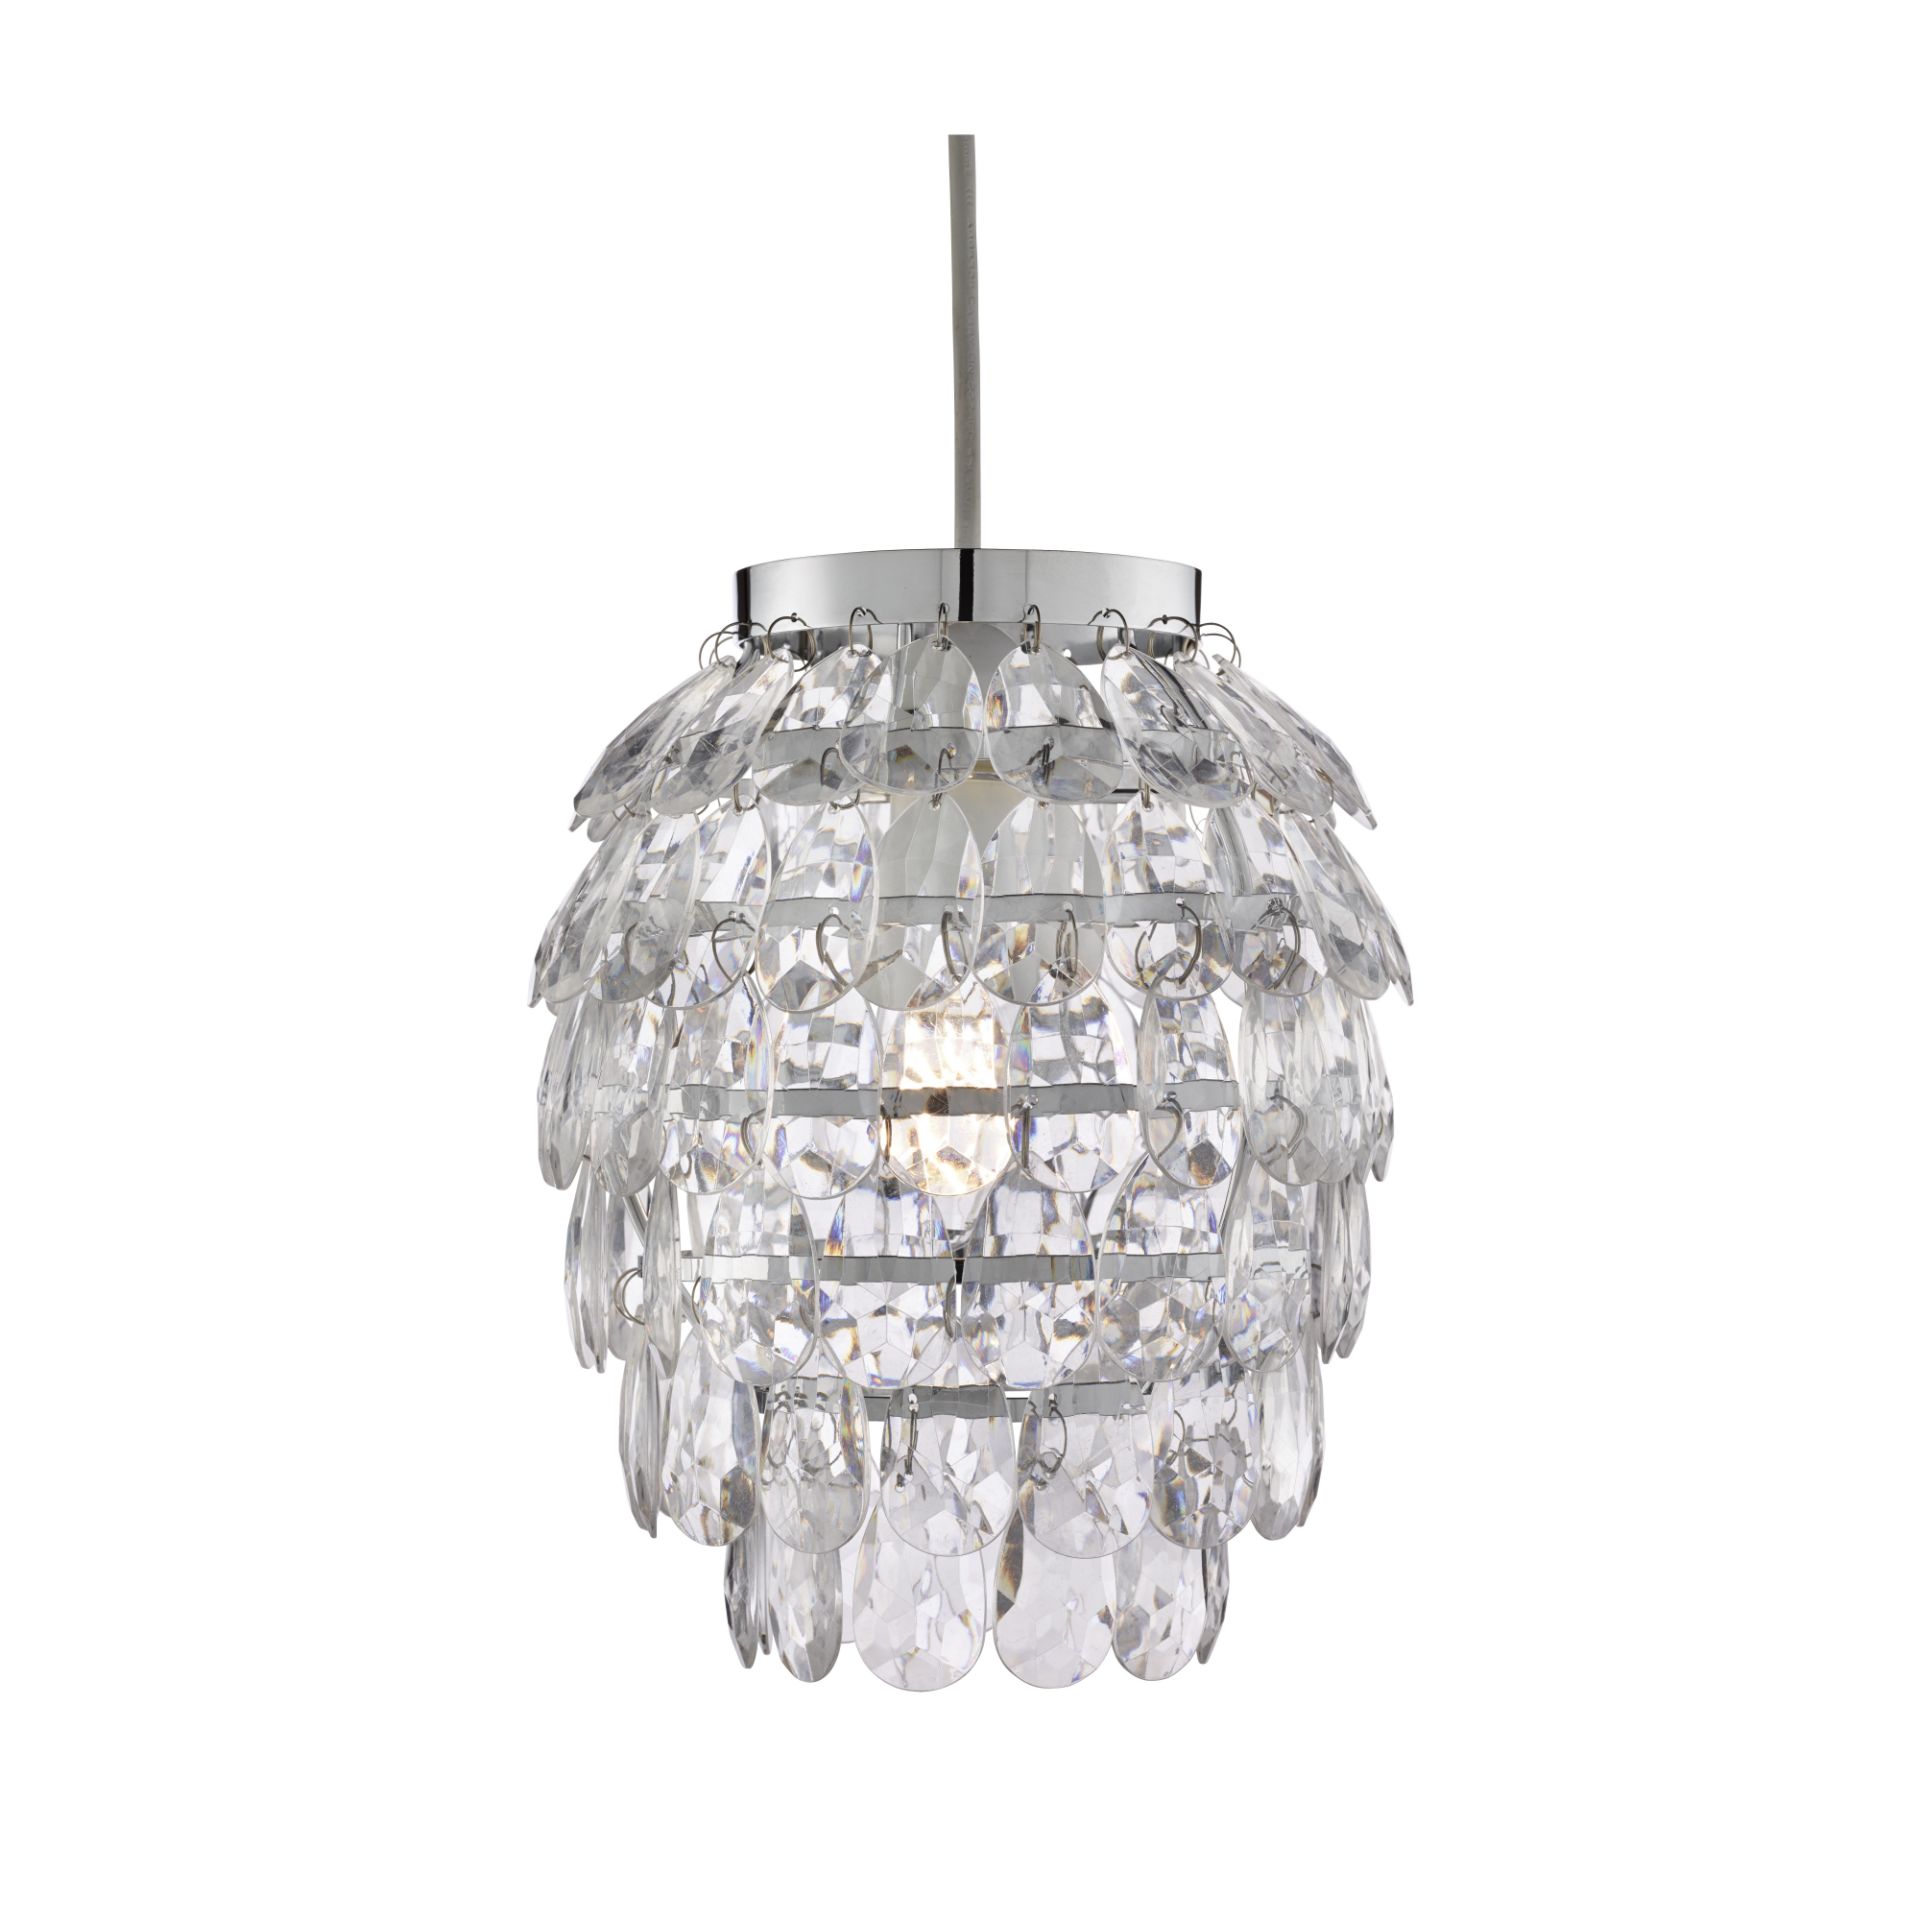 CEILING PENDANT WITH CLEAR ACRYLIC SHADE 225MM HIGH, 10W.